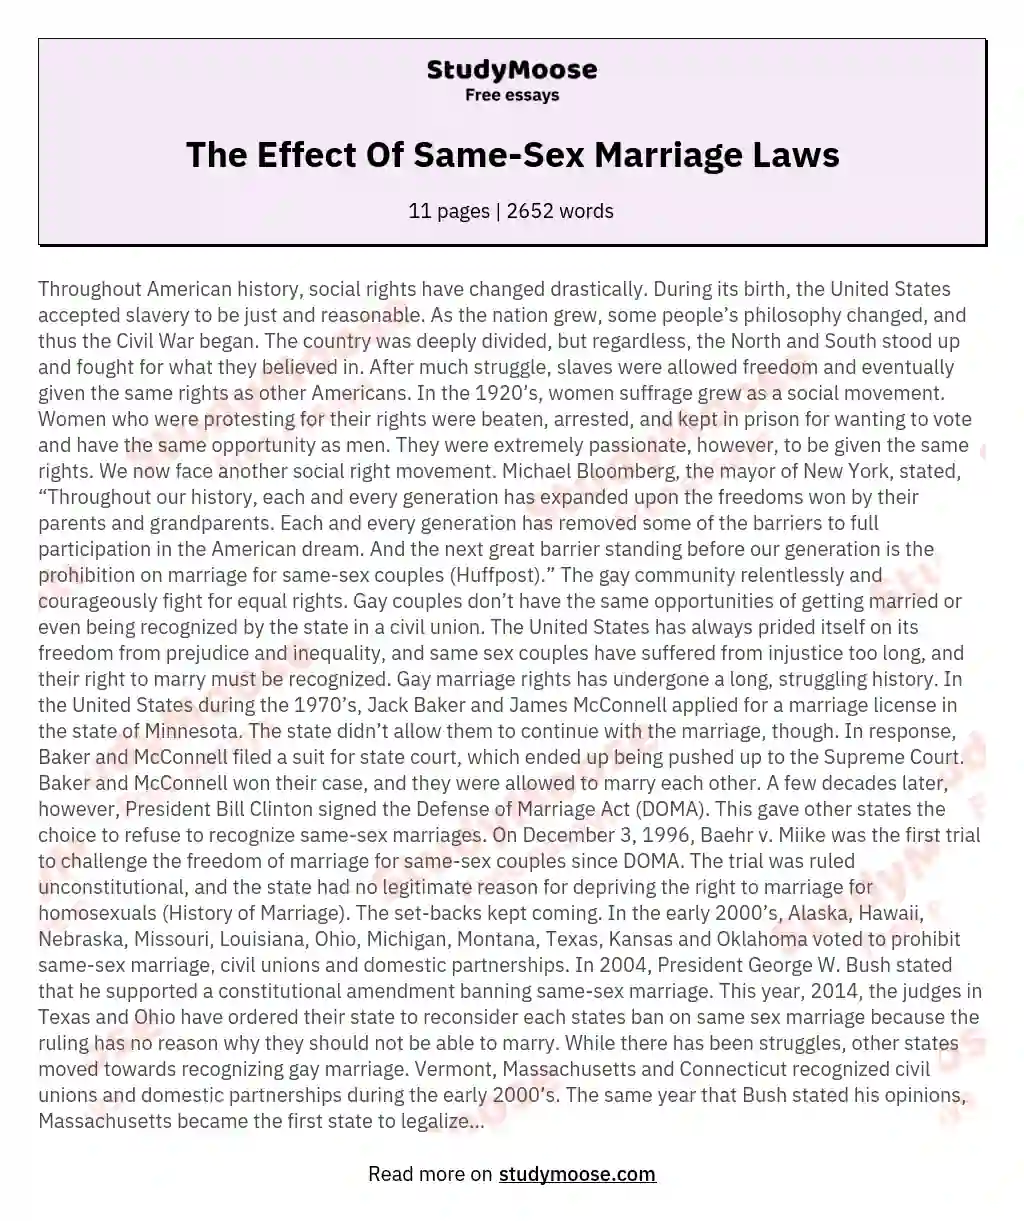 The Effect Of Same-Sex Marriage Laws